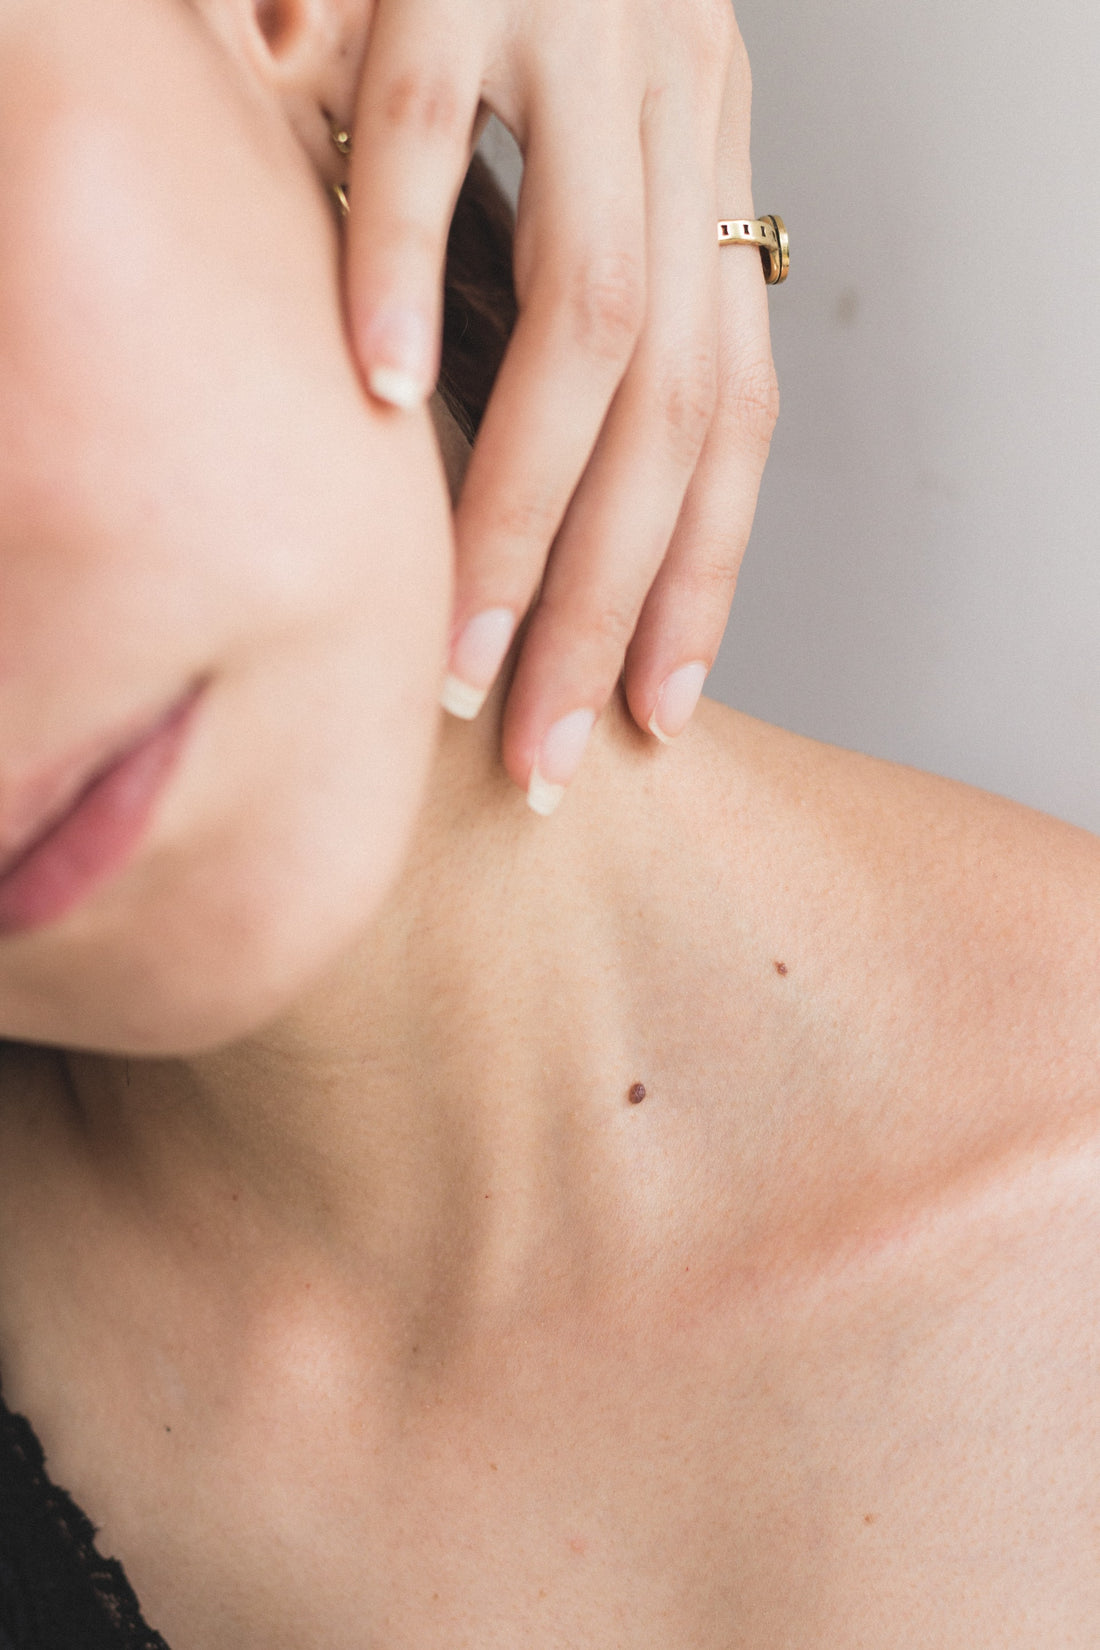 11 Warnings that Tells You're Using the Wrong Products on Your Skin